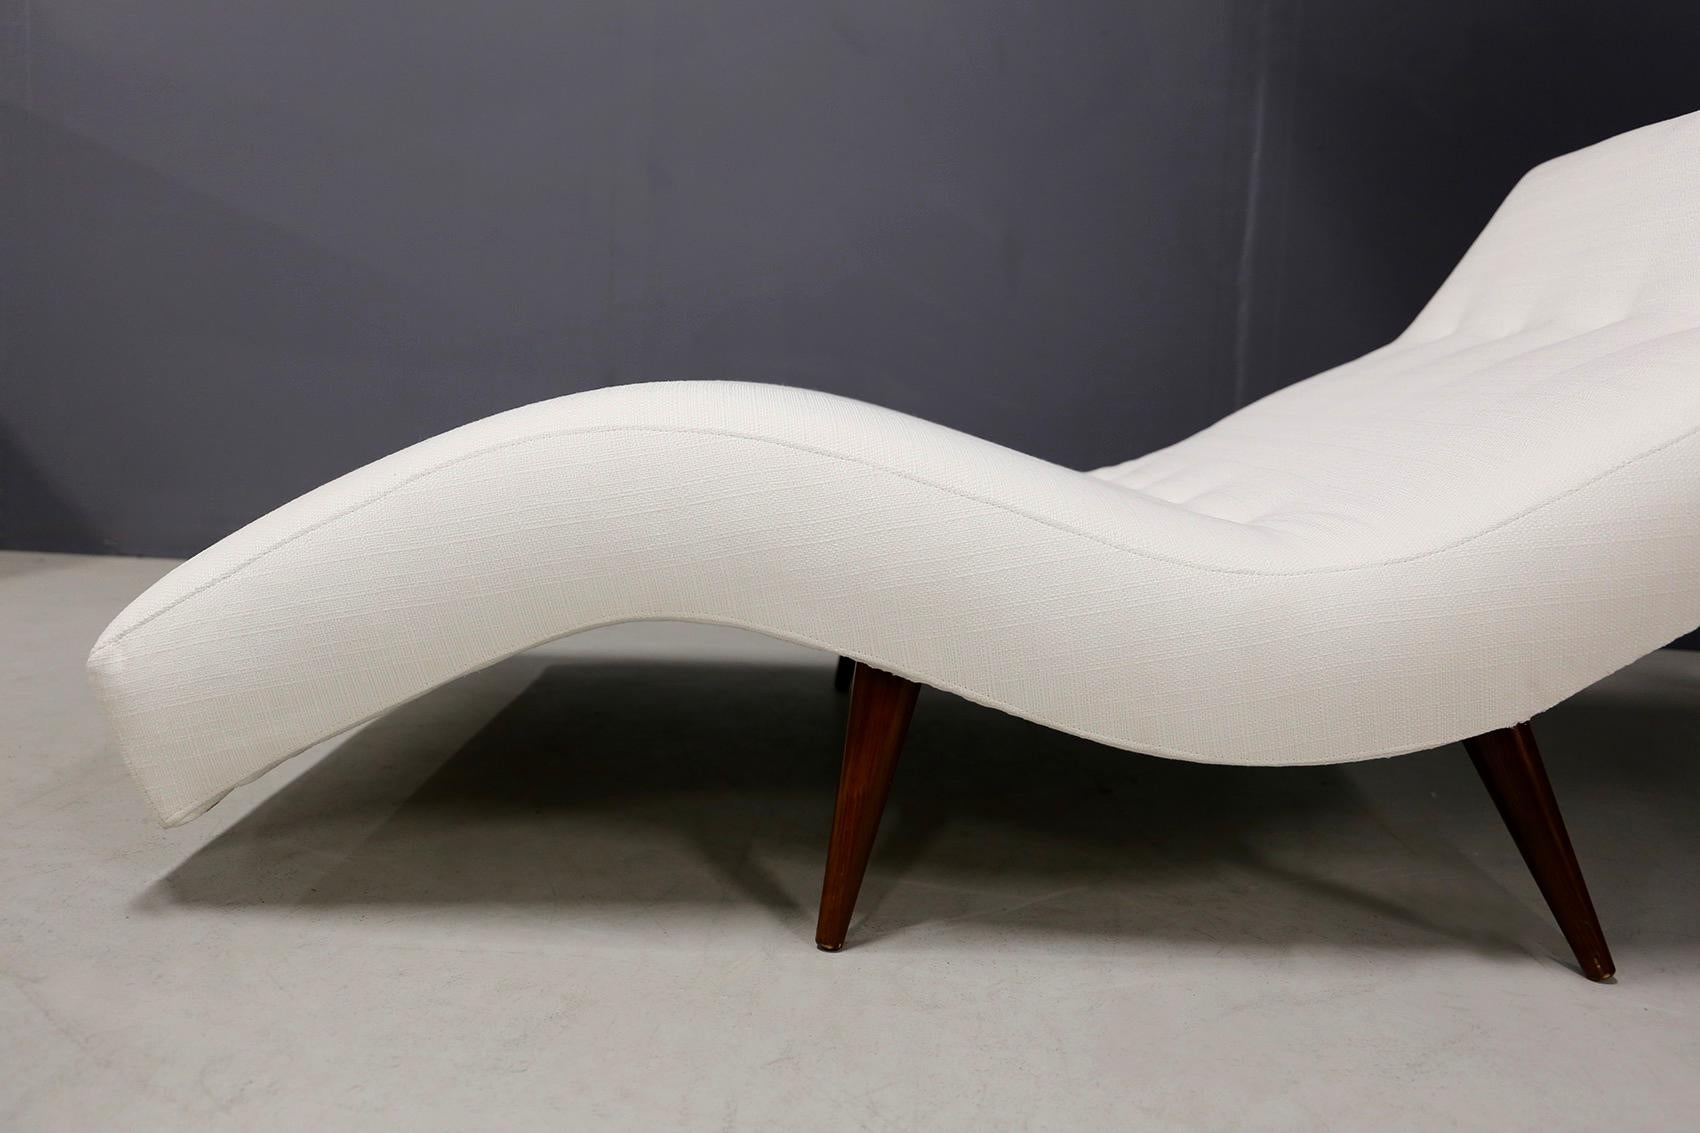 Mid-20th Century Adrian Pearsall for Craft Associates Mid-Century Modern Wave Chaise Lounge Chair